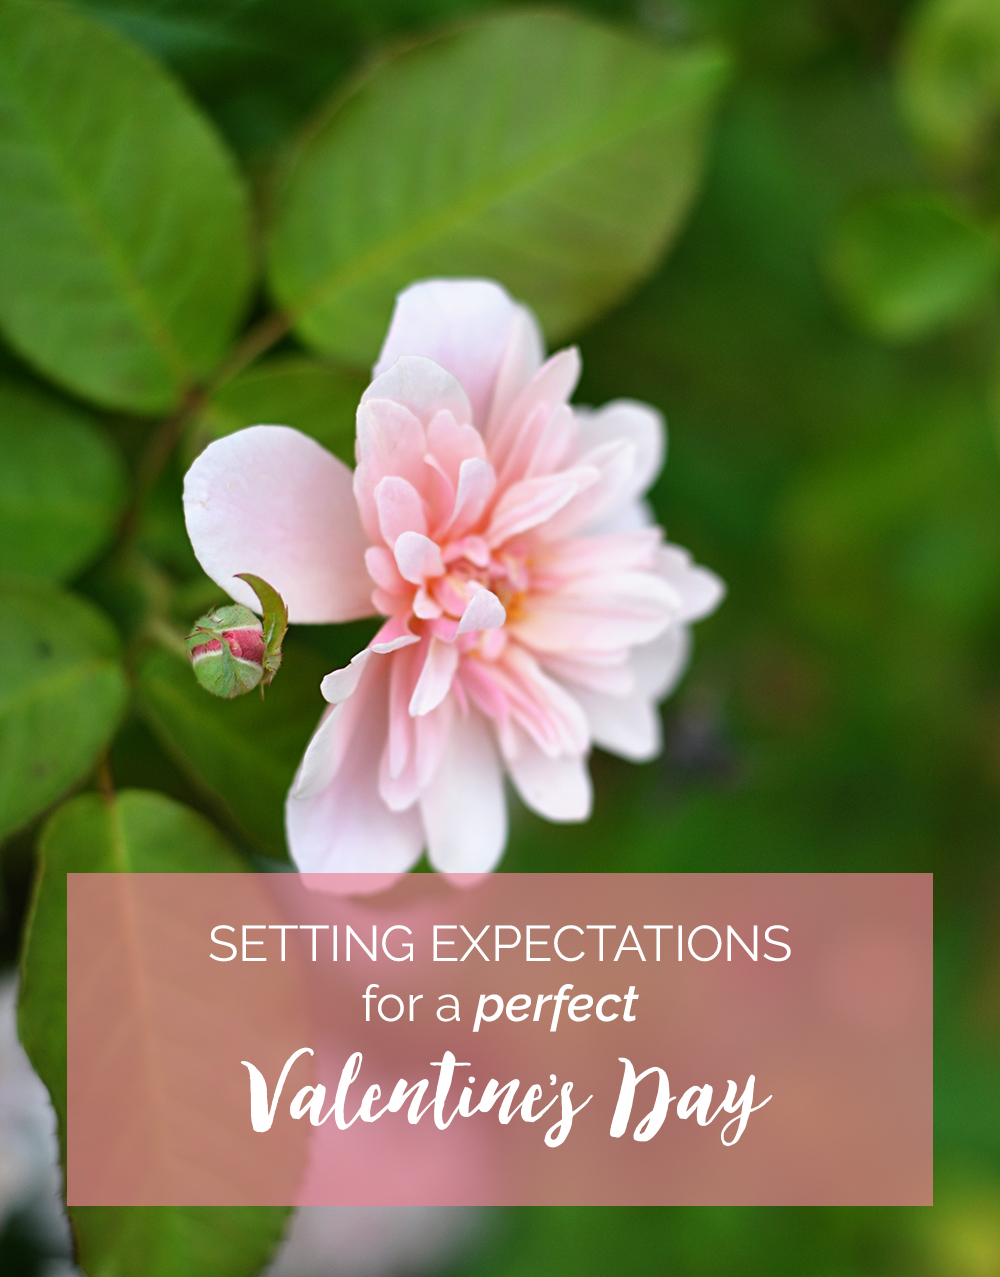 Setting Expectations for a Perfect Valentine’s Day